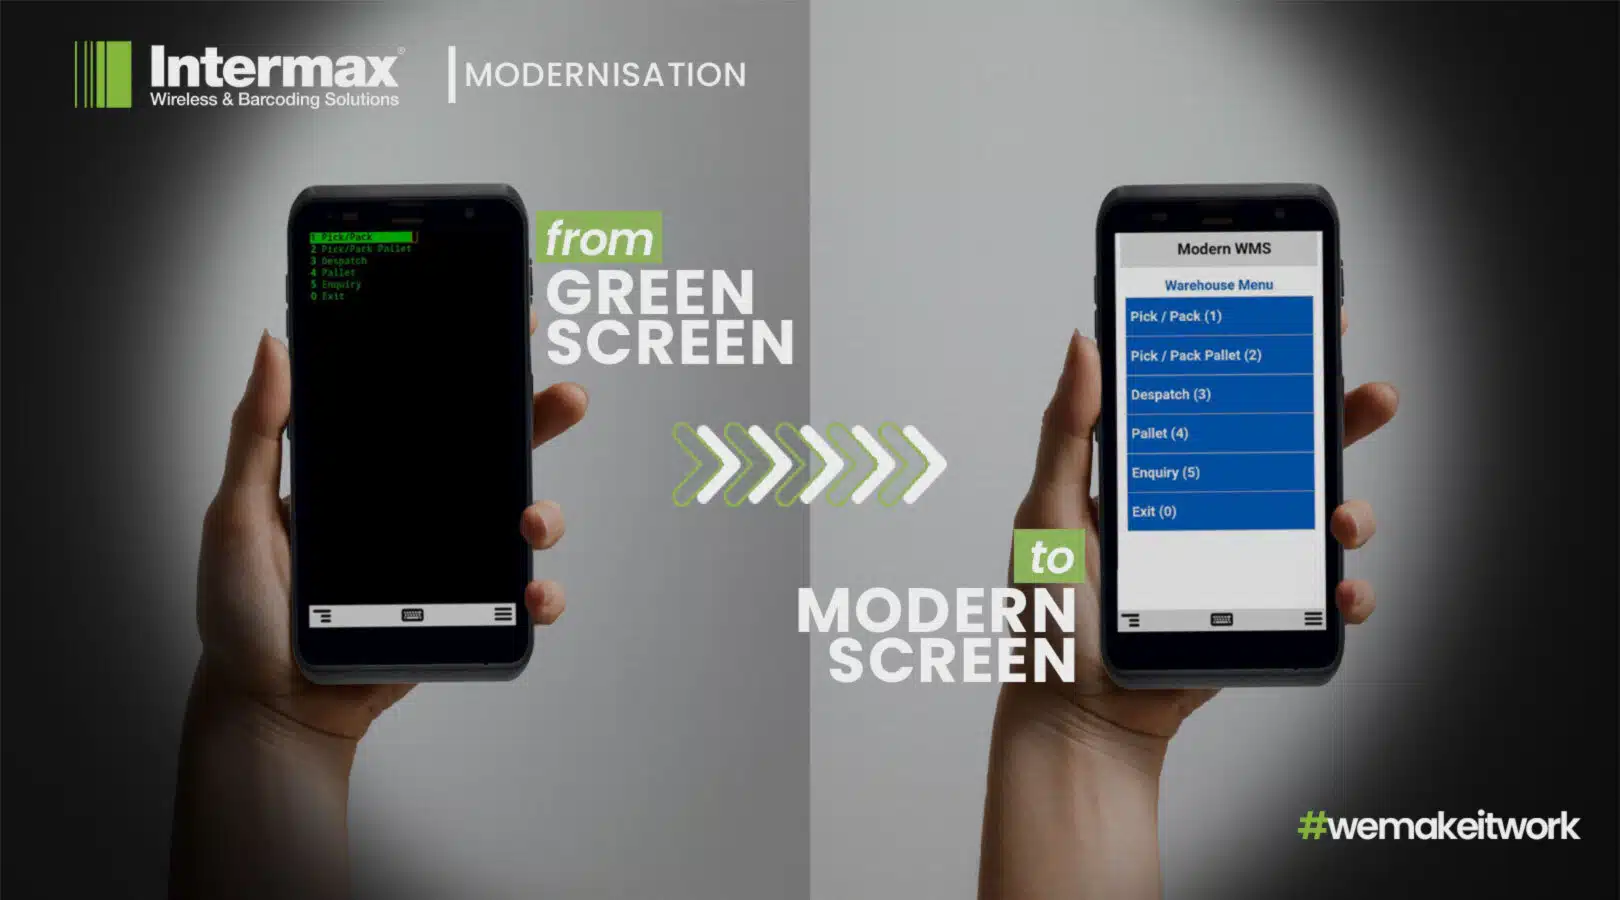 modernisation for warehouse solution - from greenscreen to modern screen with Intermax solutions